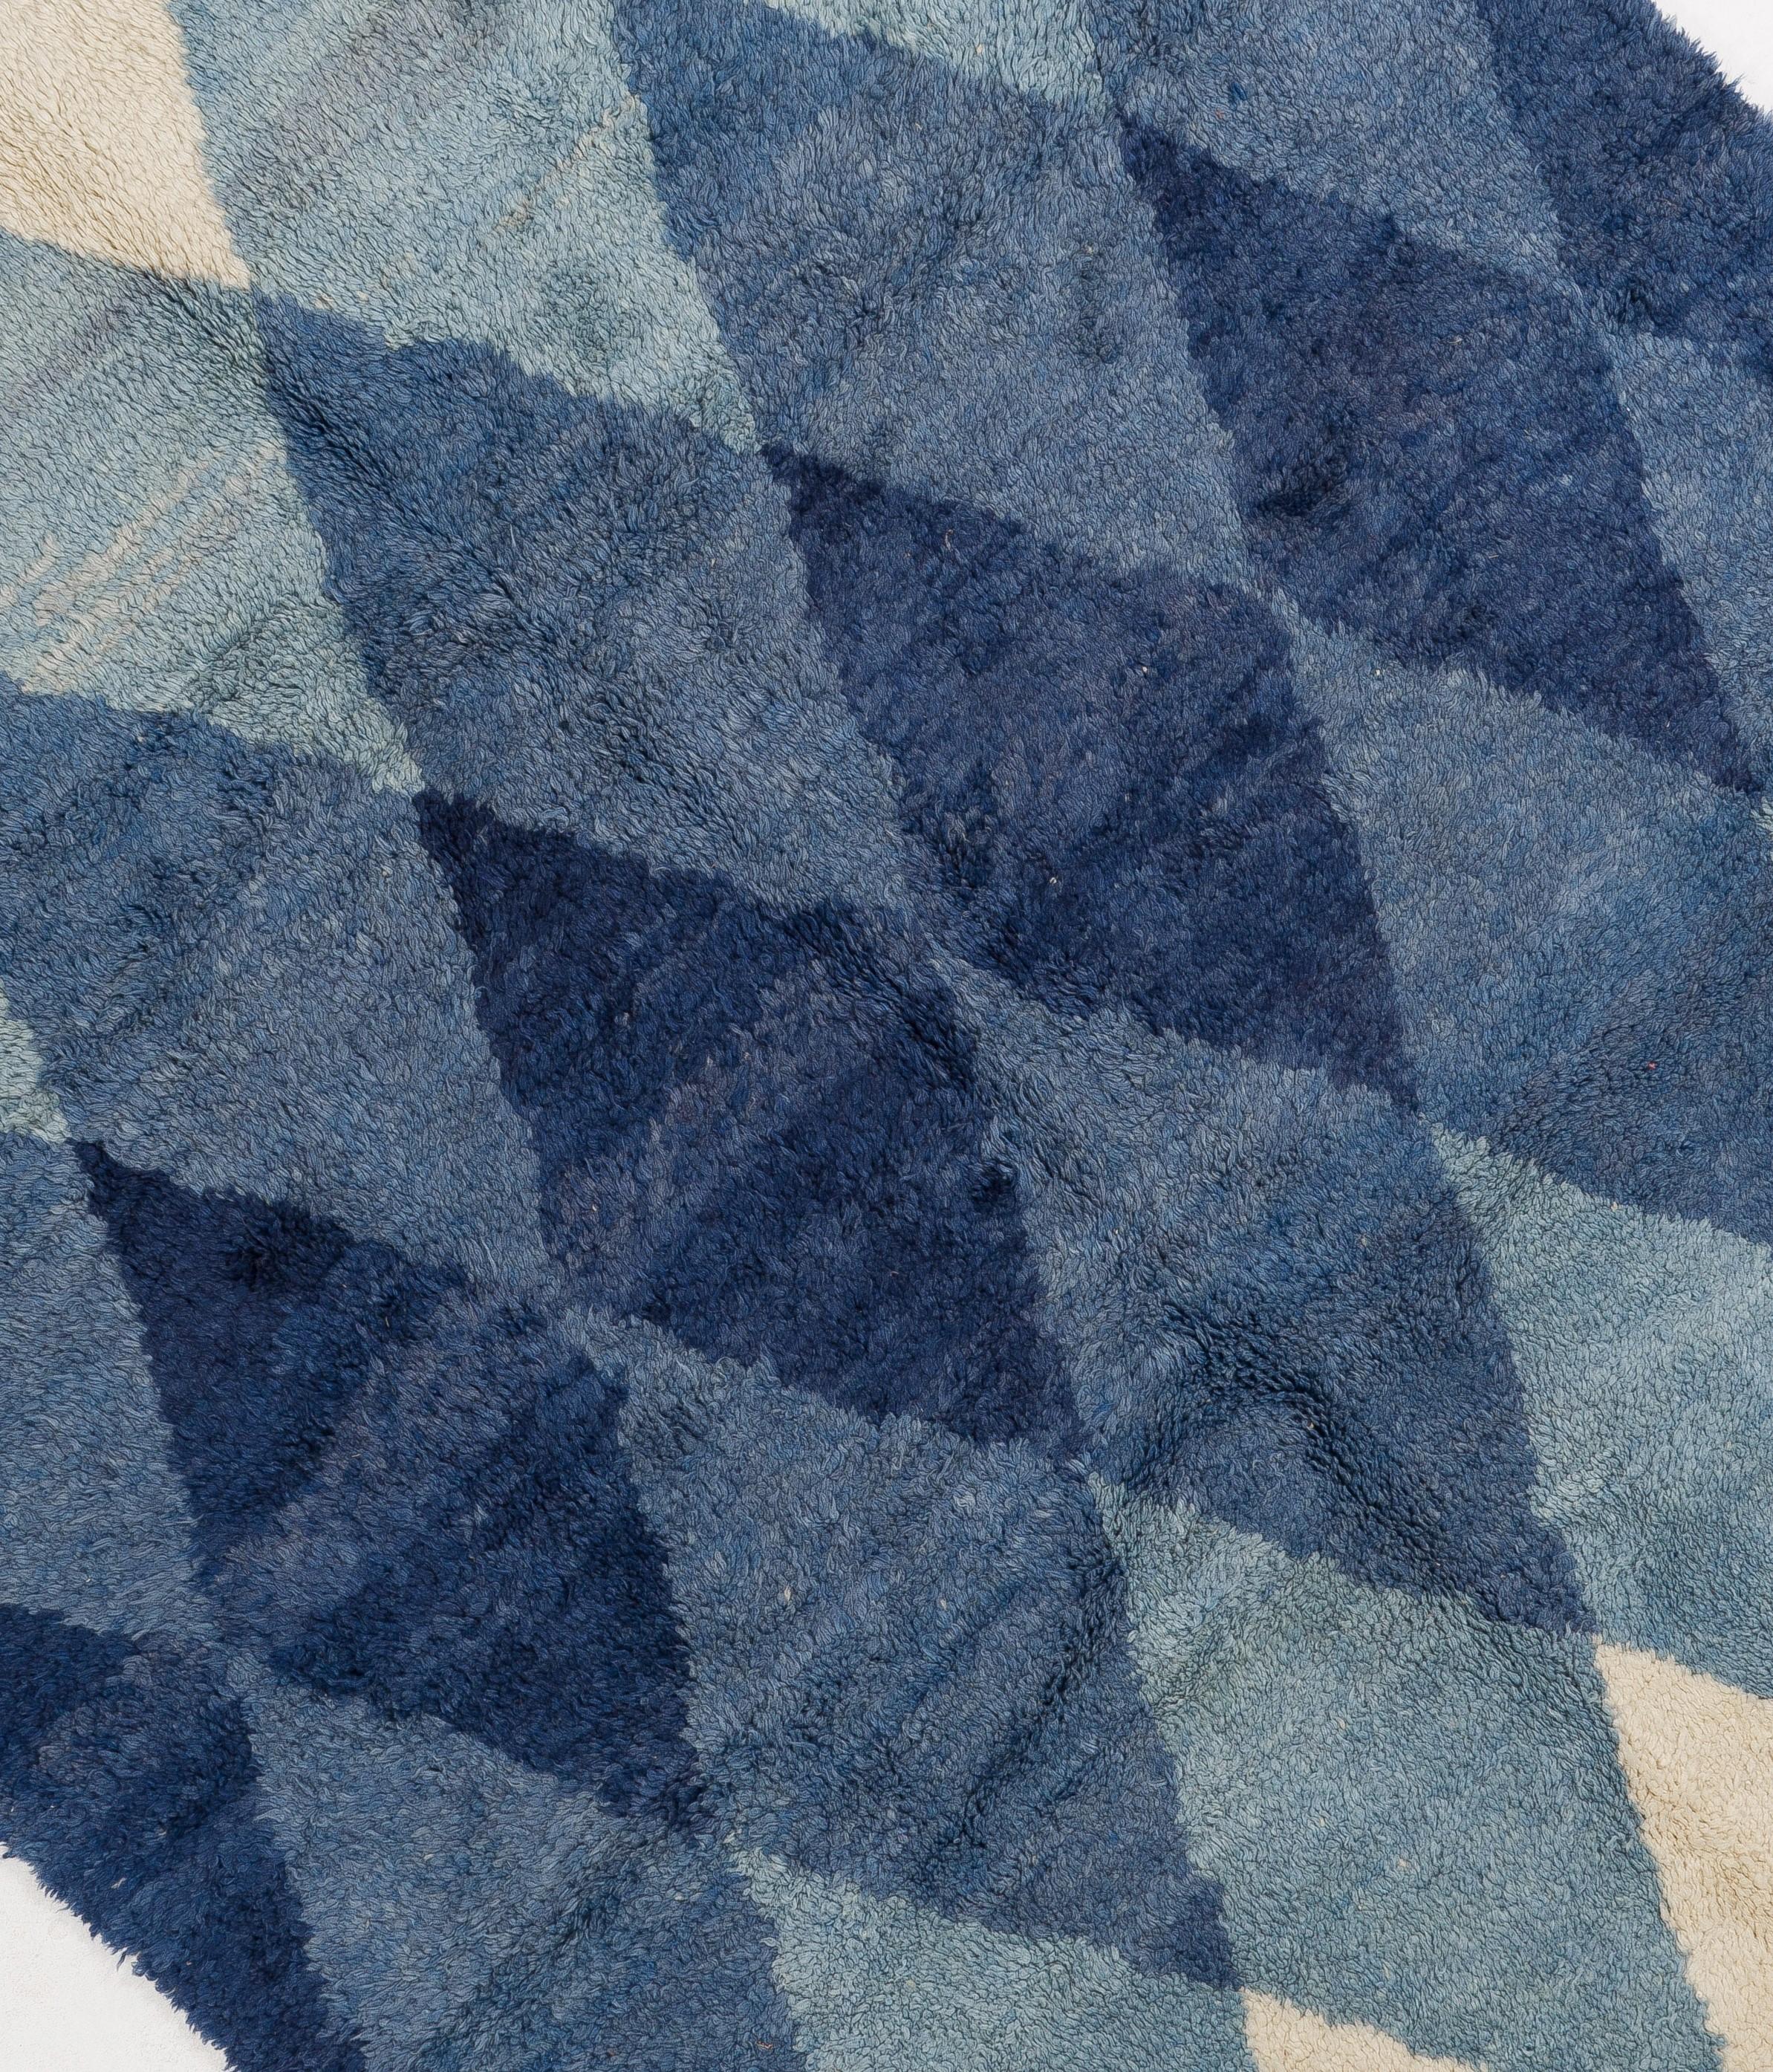 An exquisite brand-new Moroccan rug hand knotted from fine hand-spun sheep's wool with a bold, geometric pattern in beautiful shades of indigo blue set against a cream background. A true statement piece that can easily be the focal point of any